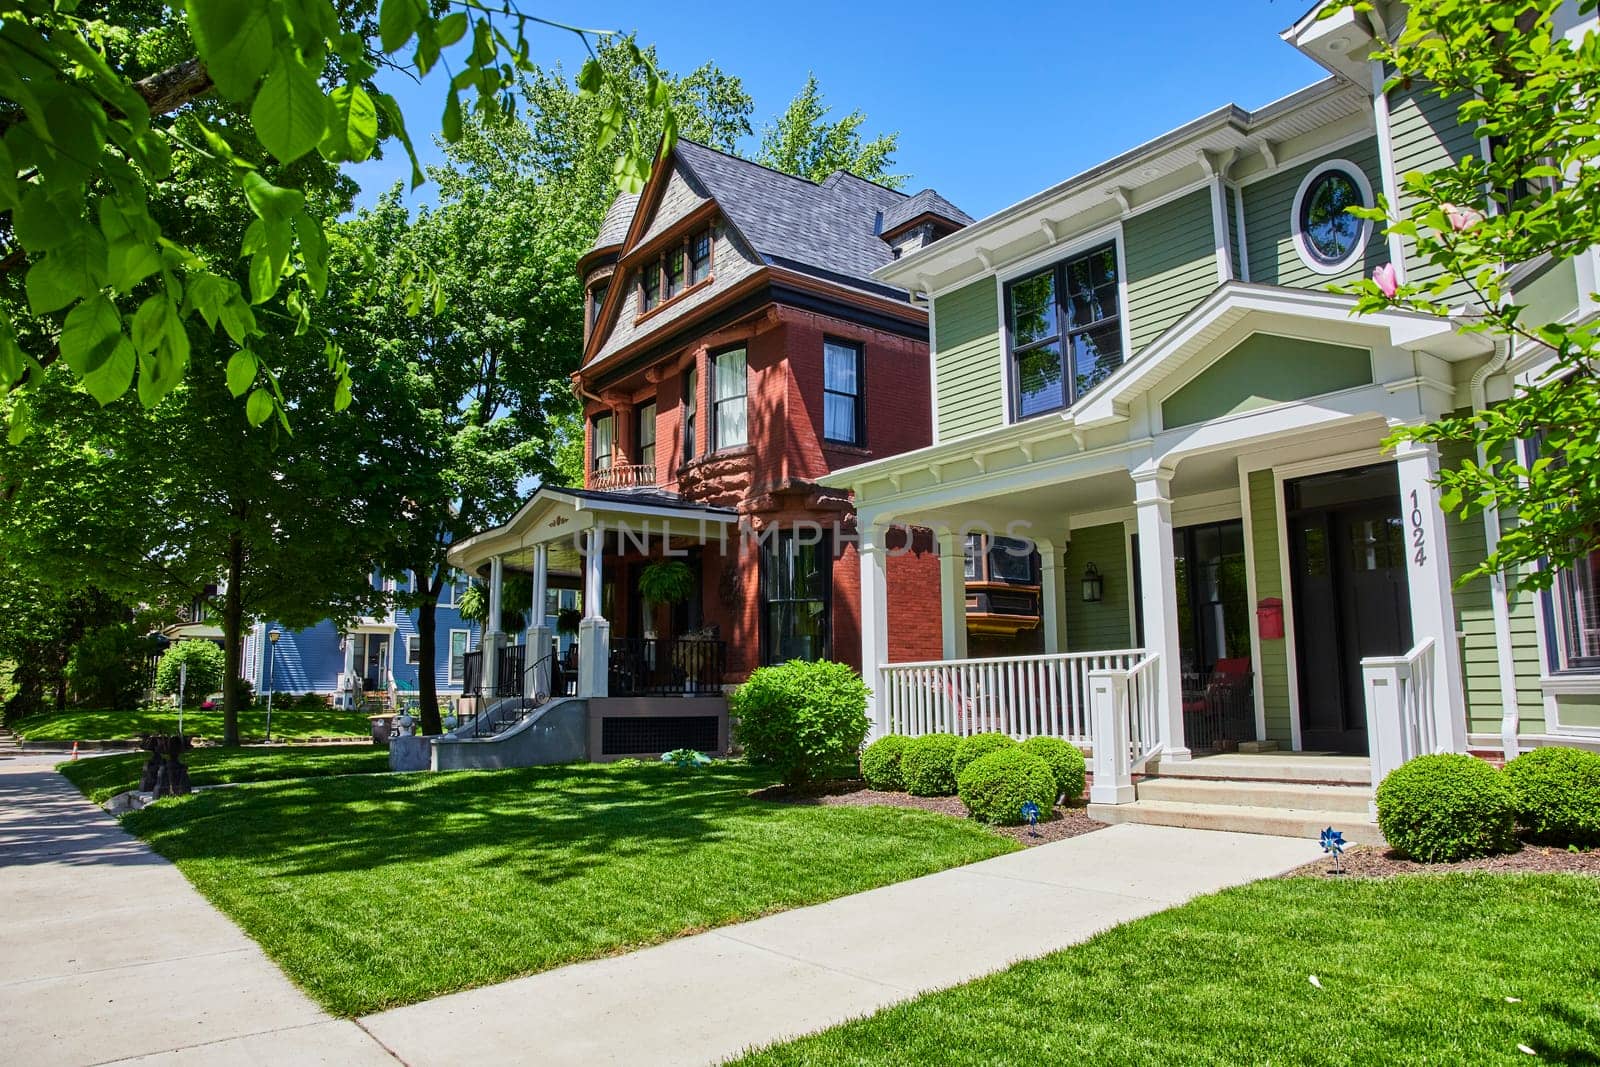 Charming suburban street in Fort Wayne with historic Victorian and modern homes under a clear blue sky.